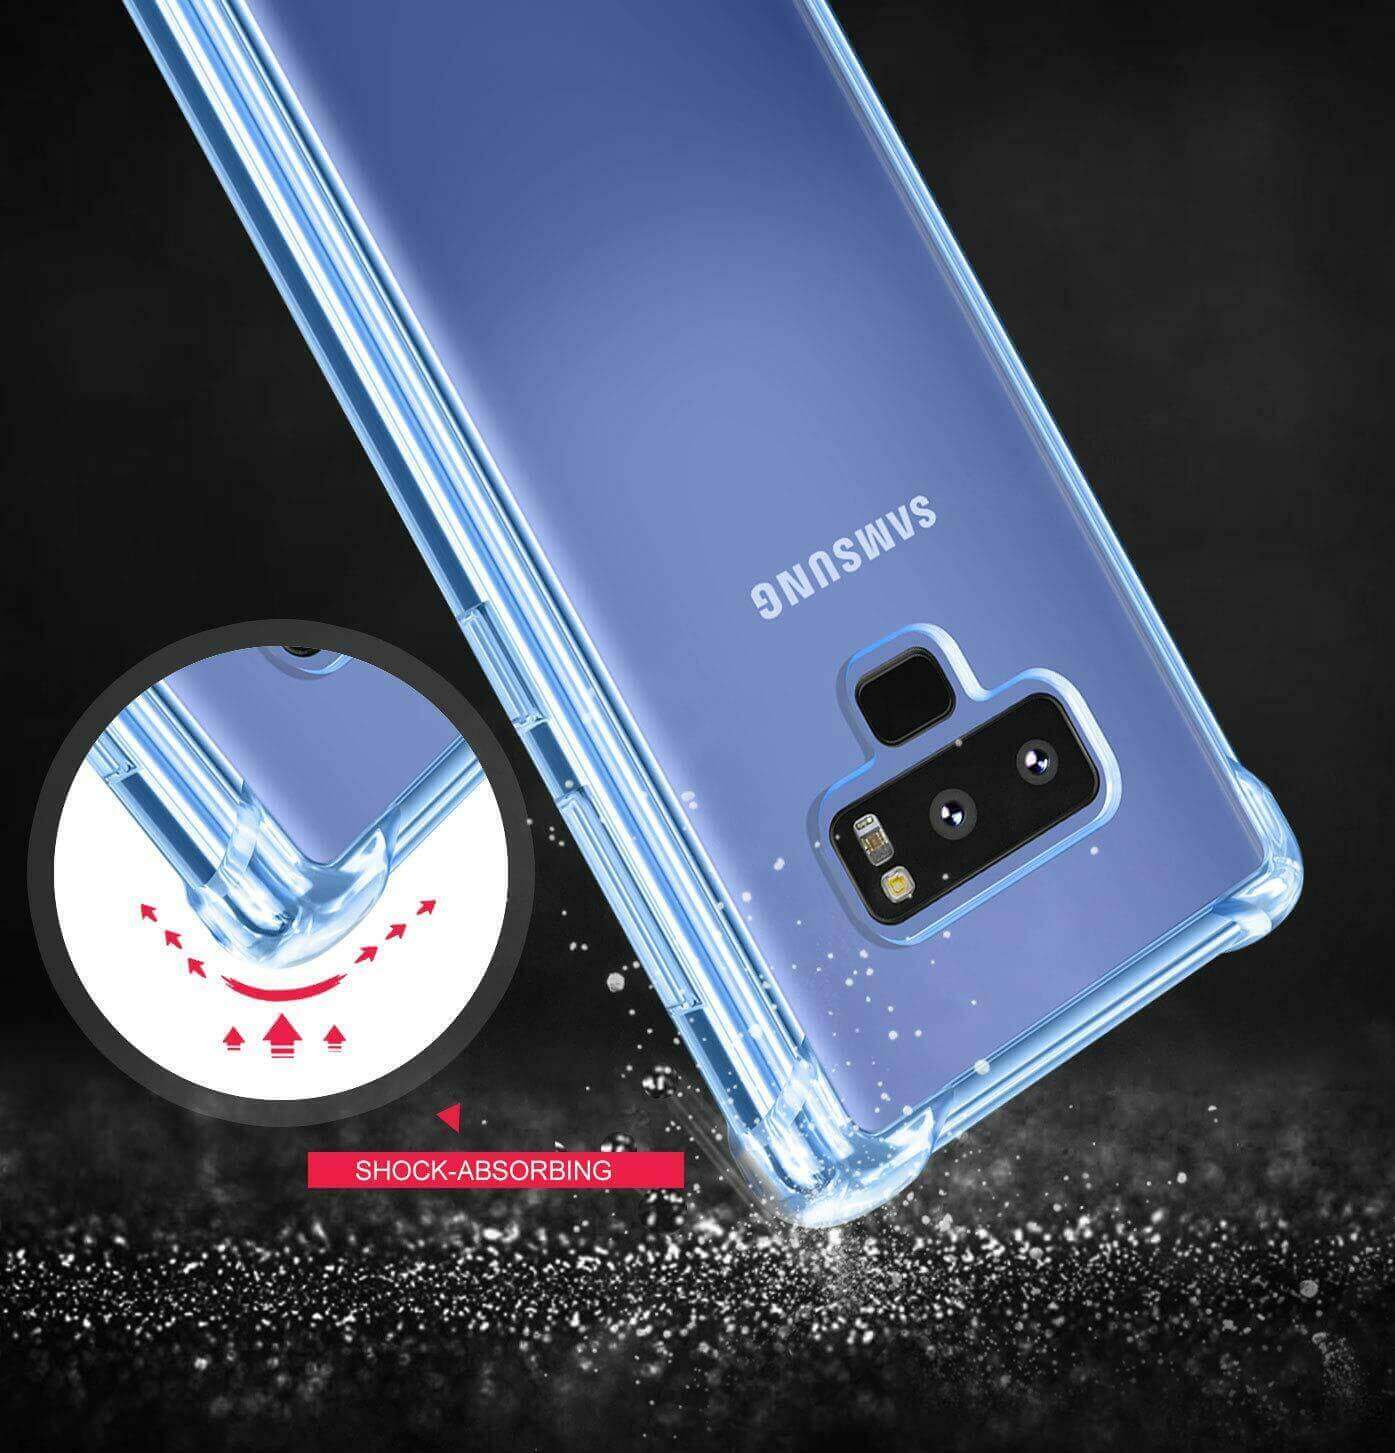 For Samsung Galaxy Note 9 Case Cover Clear ShockProof Soft TPU Silicone